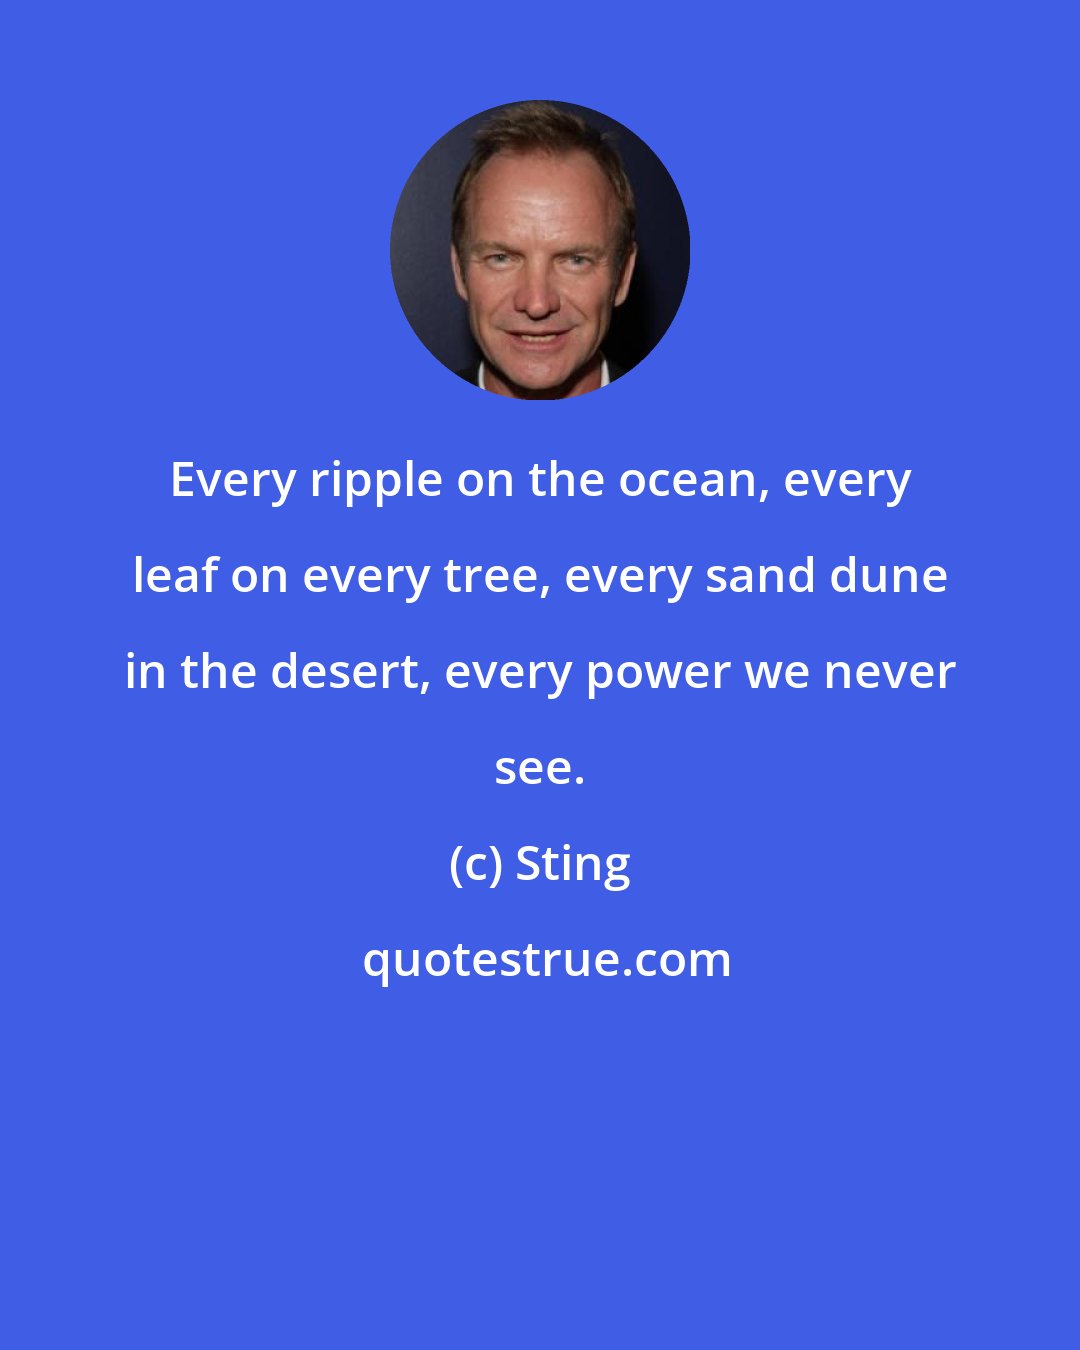 Sting: Every ripple on the ocean, every leaf on every tree, every sand dune in the desert, every power we never see.